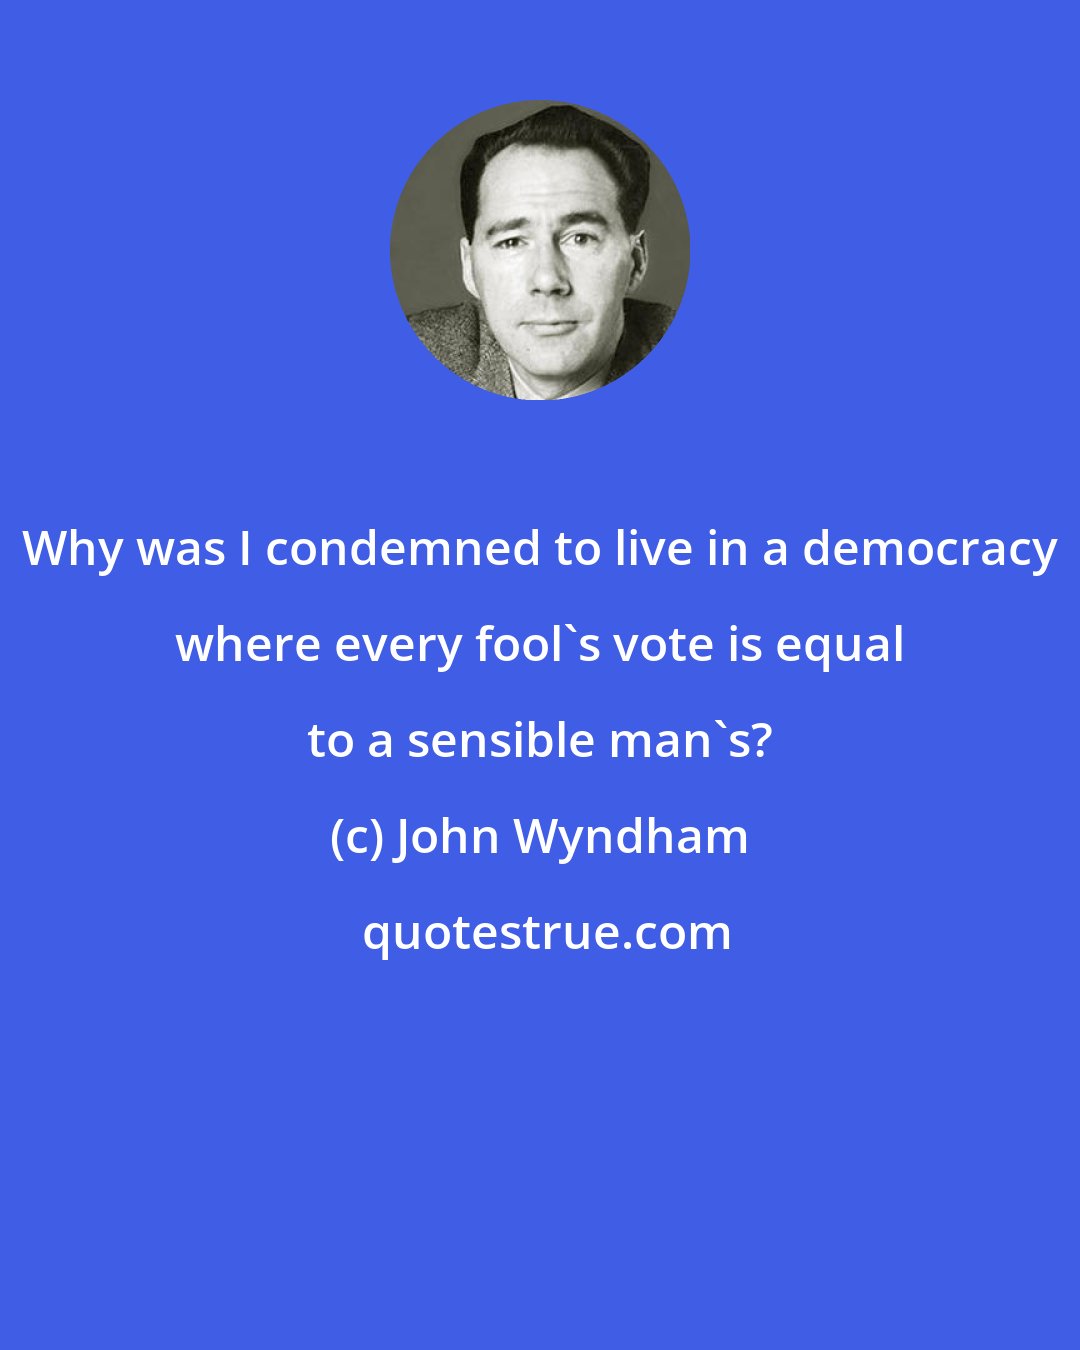 John Wyndham: Why was I condemned to live in a democracy where every fool's vote is equal to a sensible man's?